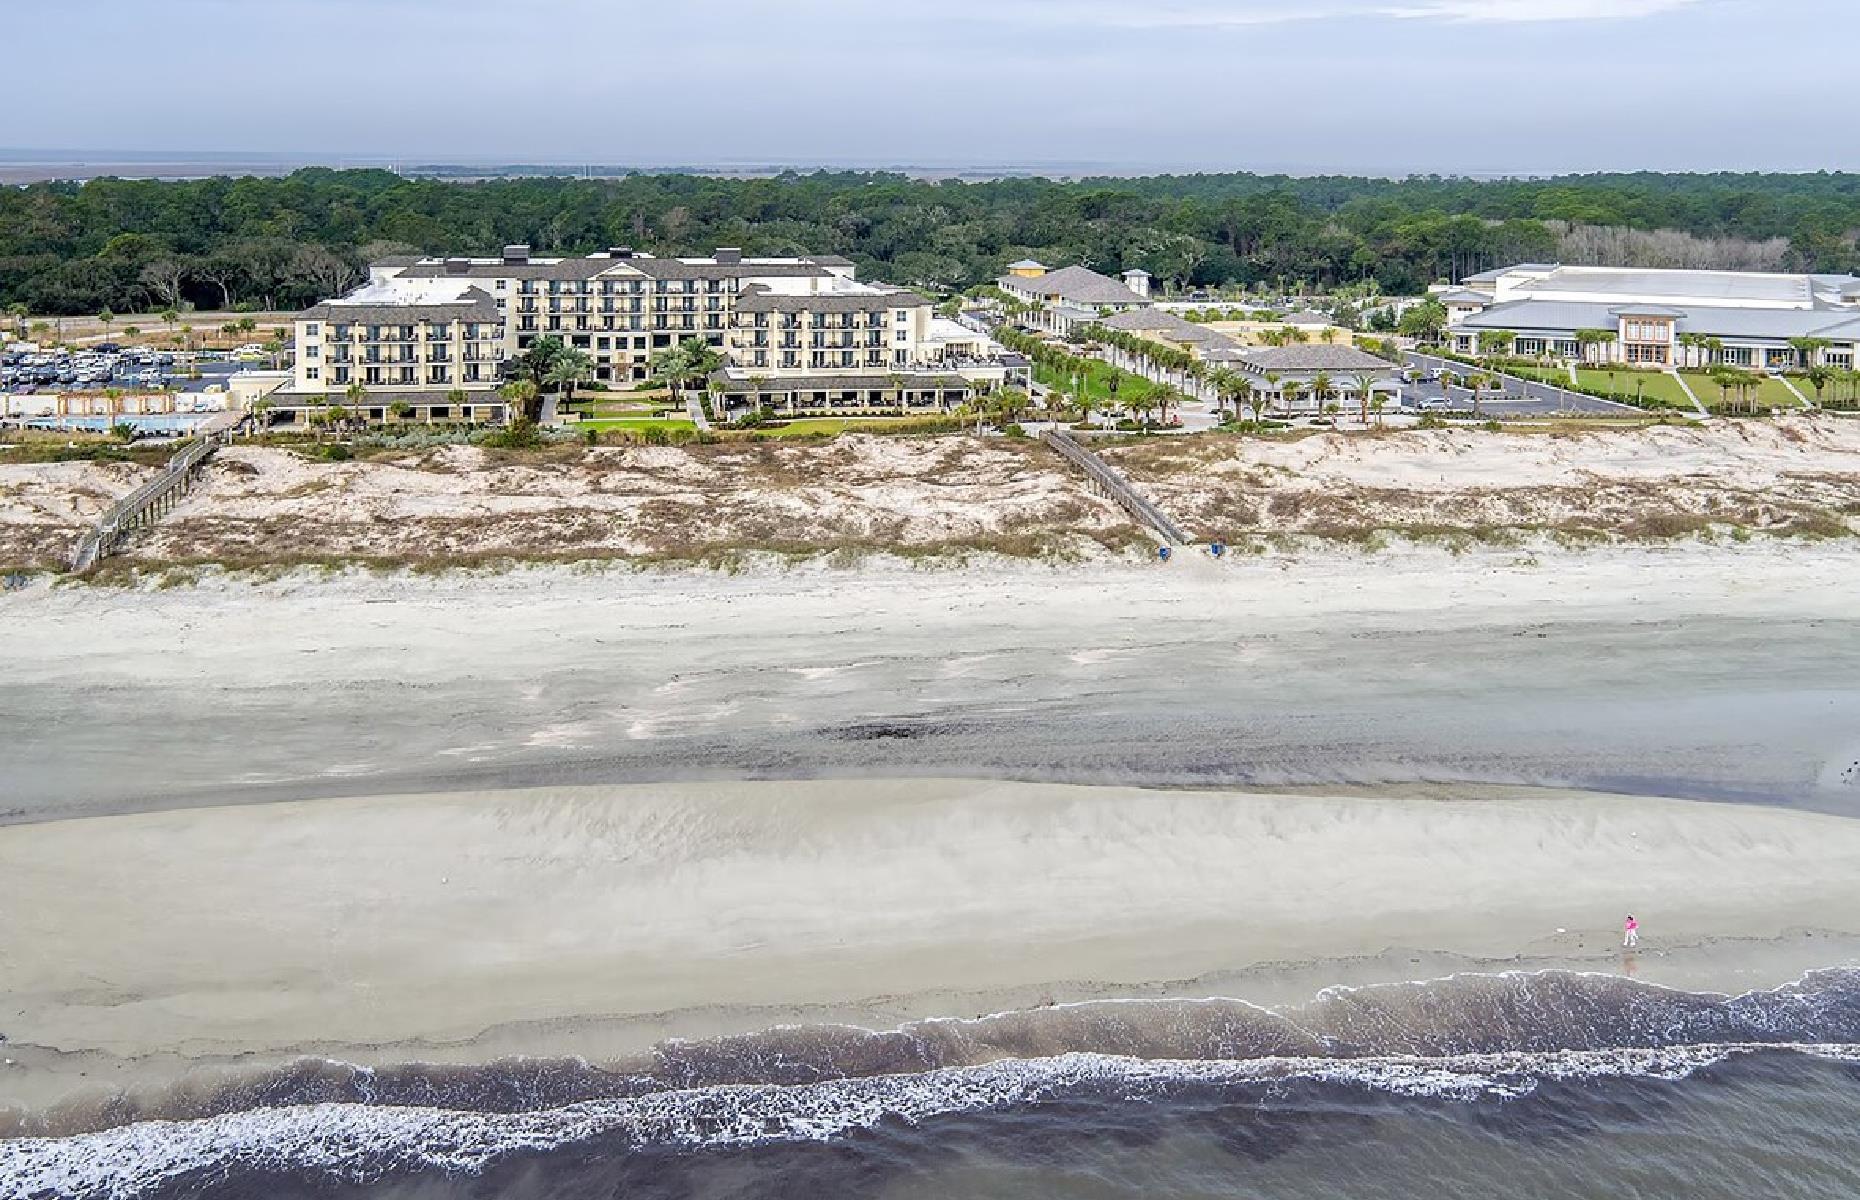 <p>With 187 guest rooms and 13 suites, <a href="https://www.marriott.com/hotels/travel/bqkwi-the-westin-jekyll-island/">The Westin</a> sits on a barrier island off the coast of Georgia. Channeling both beach vibes and Southern charm, the hotel looks directly onto a white sand beach, with glorious waterfront views. The hotel’s Reserve Steak House serves up local seafood as well as premium beef. Guests can also enjoy food and drink by the picturesque pool, which also offers ocean views.</p>  <p><strong><a href="https://www.loveexploring.com/galleries/87456/americas-most-charming-seaside-towns">These are America's most beautiful seaside towns</a></strong></p>